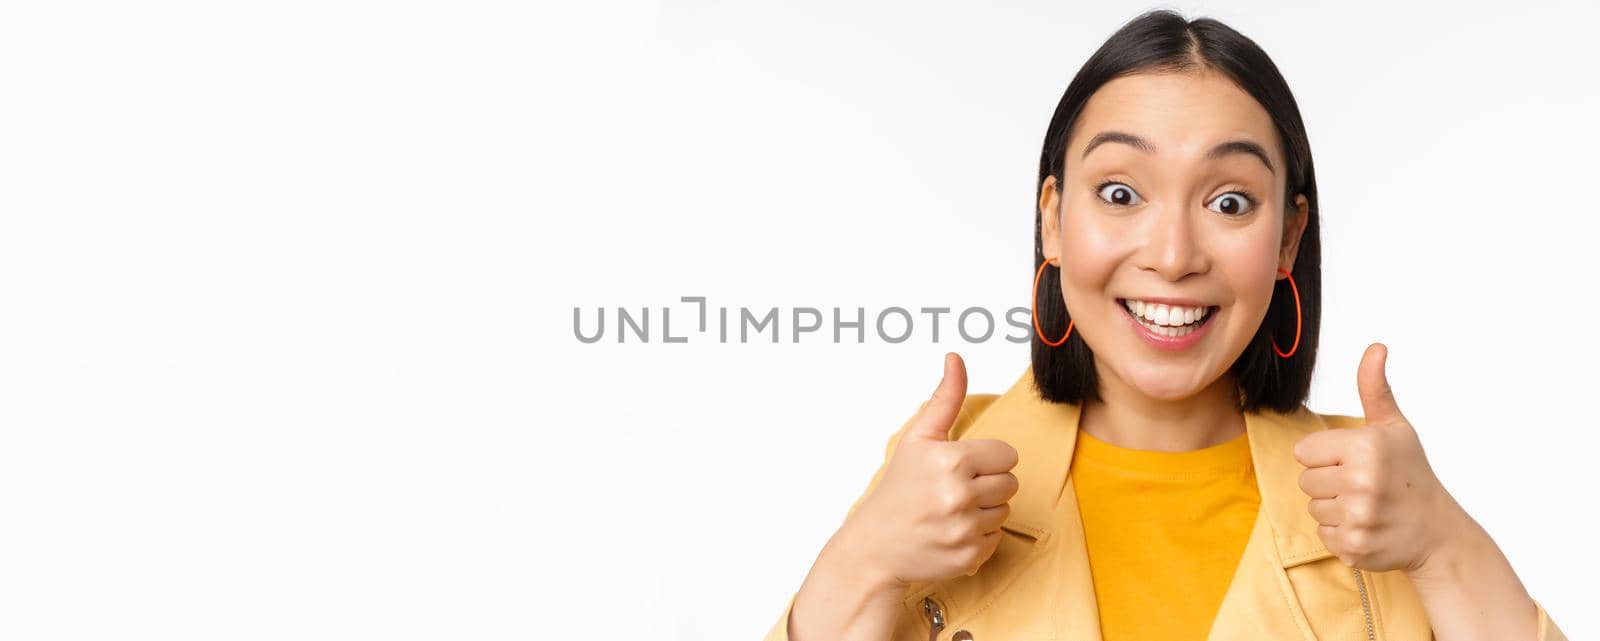 Smiling asian girl showing thumbs up, looking pleased, approve smth, standing over white background. Copy space